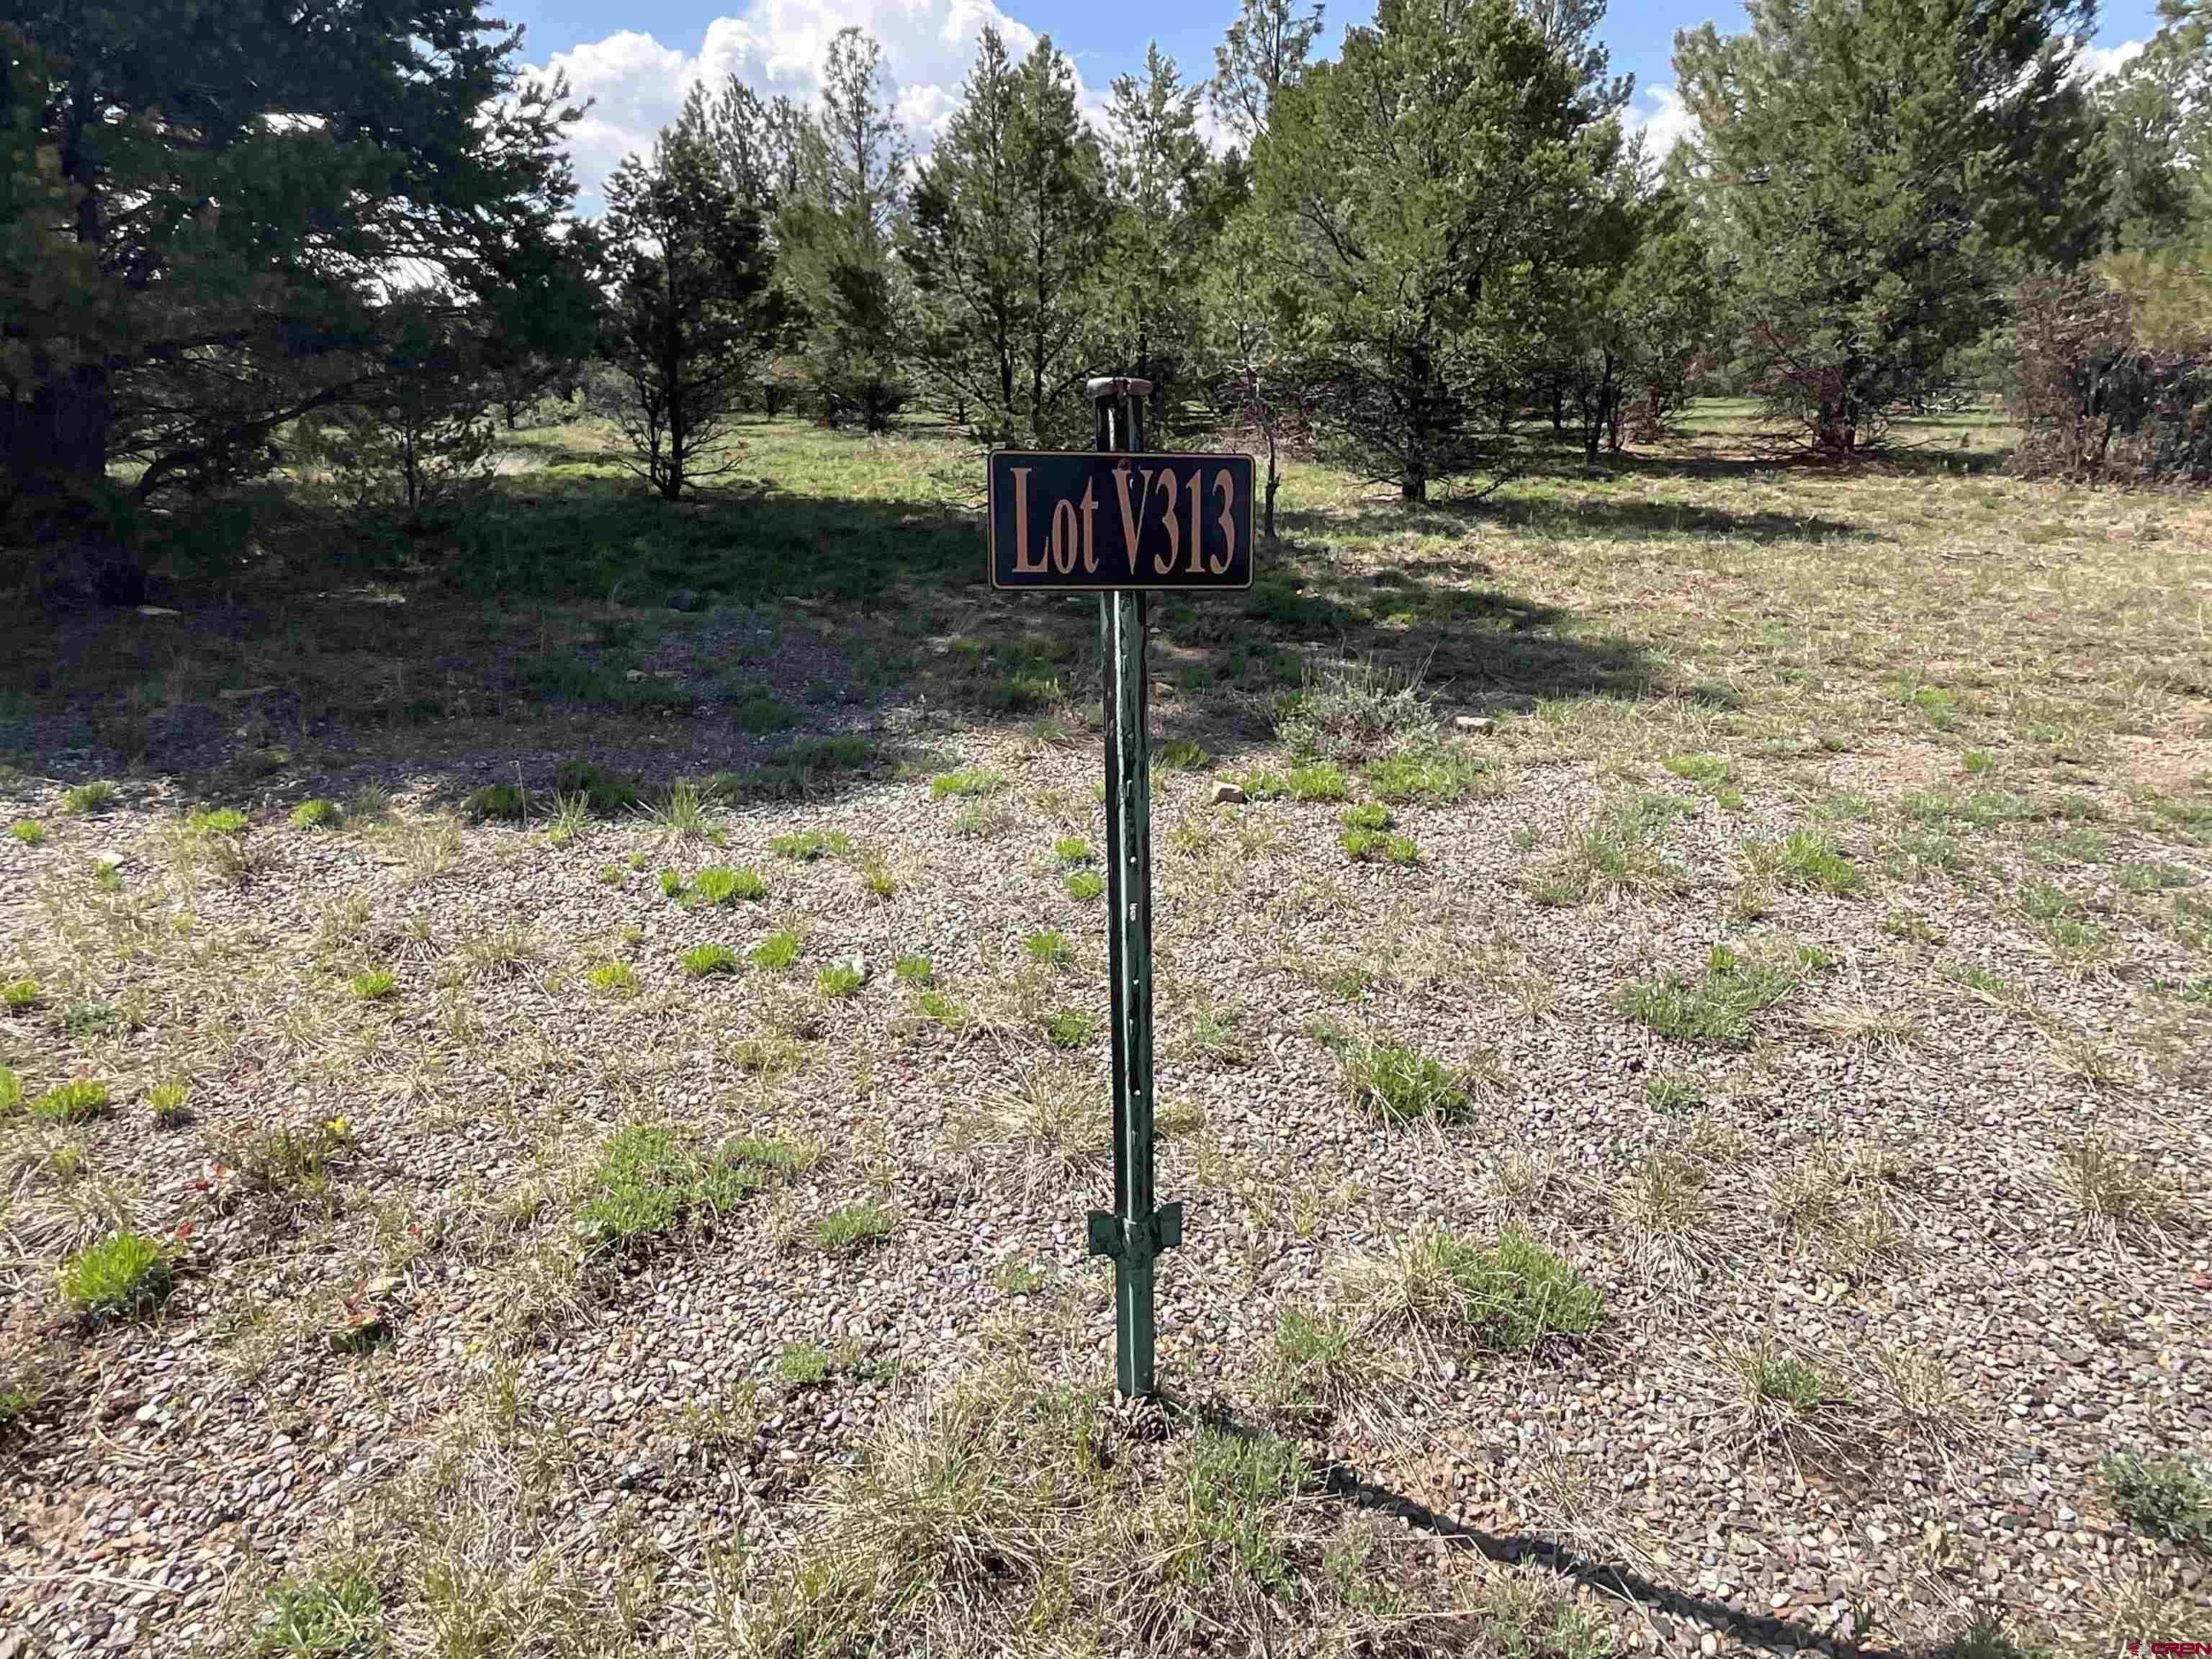 Build your dream home at Fairway Pines Divide Ranch and Club. The Golf Course will amaze you with some of the most breathtaking views in Southwest Colorado. The community rests at about 8000 feet in elevation. Ponderosa Pine, Juniper, and Pinion surround this property to give you shade and privacy. Just a 10 Minute drive to downtown Ridgway and 30 minutes to Montrose. Do not hesitate, now is the time.